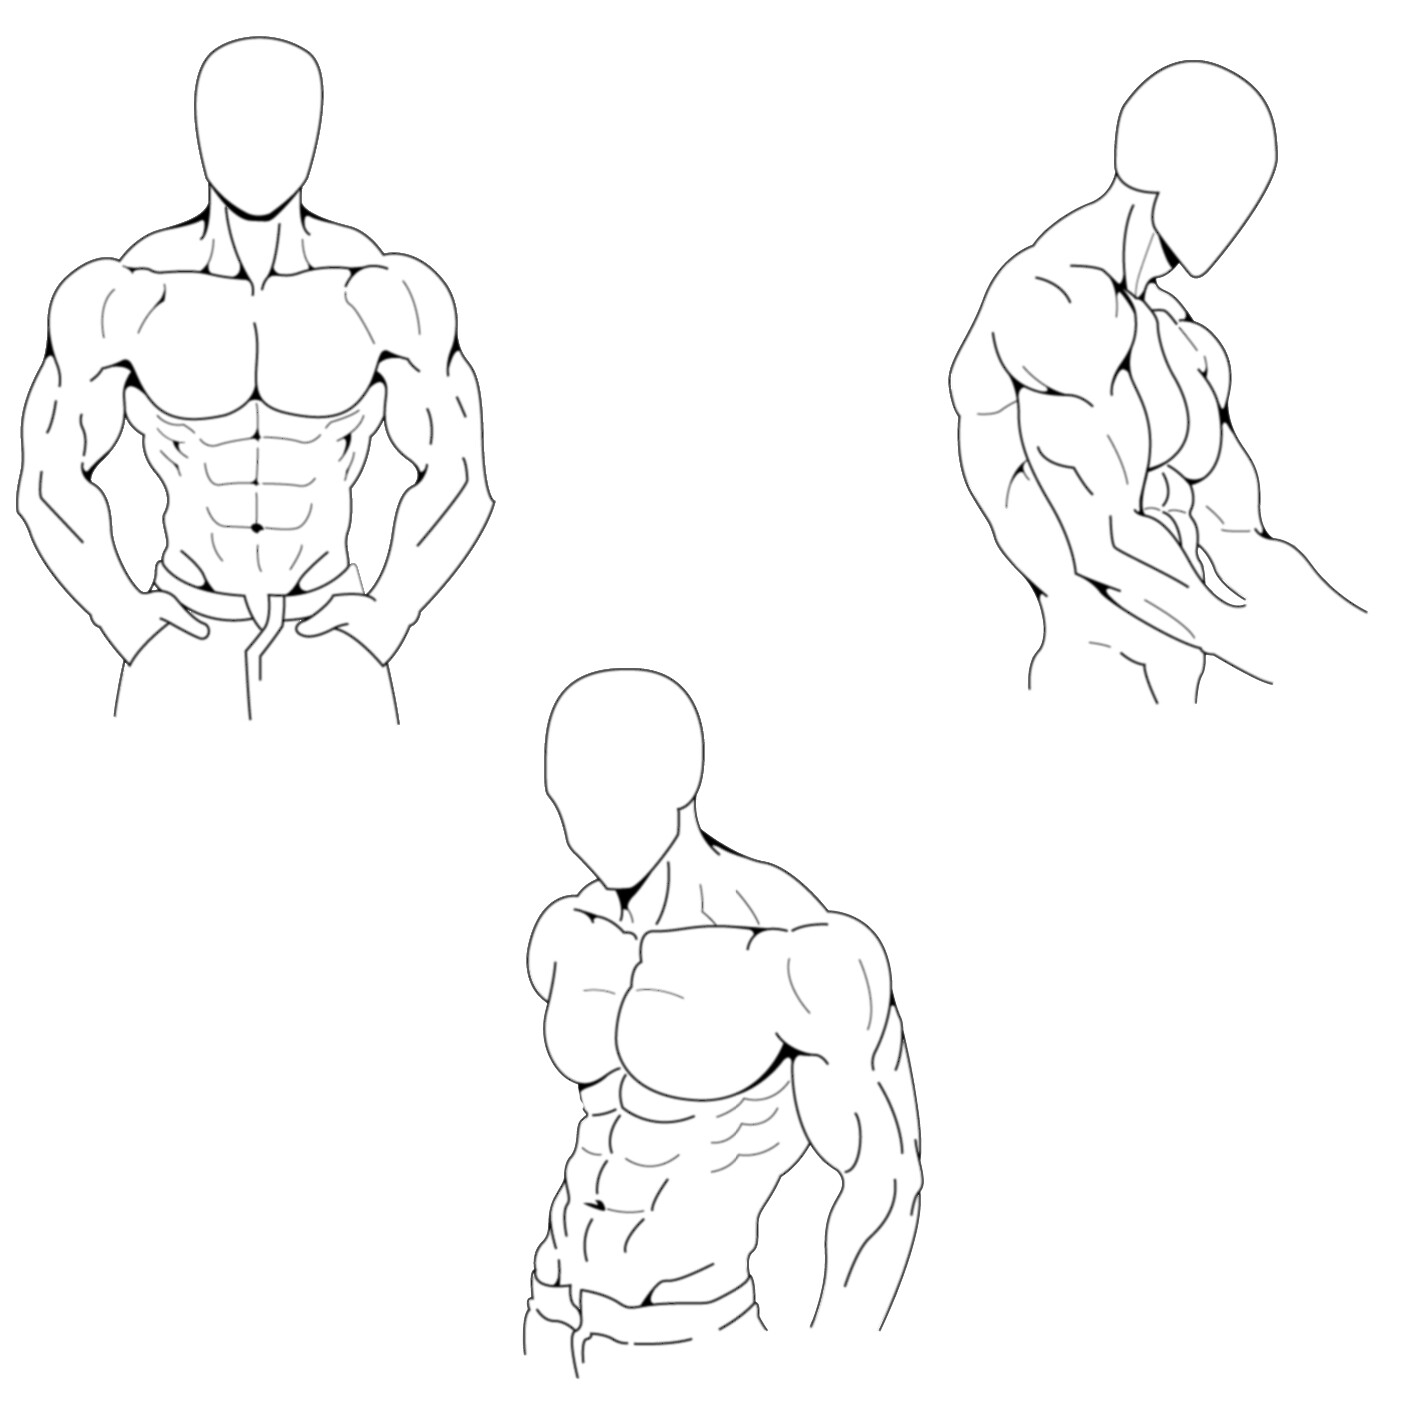 Agshowsnsw | How to draw a boy body anime character